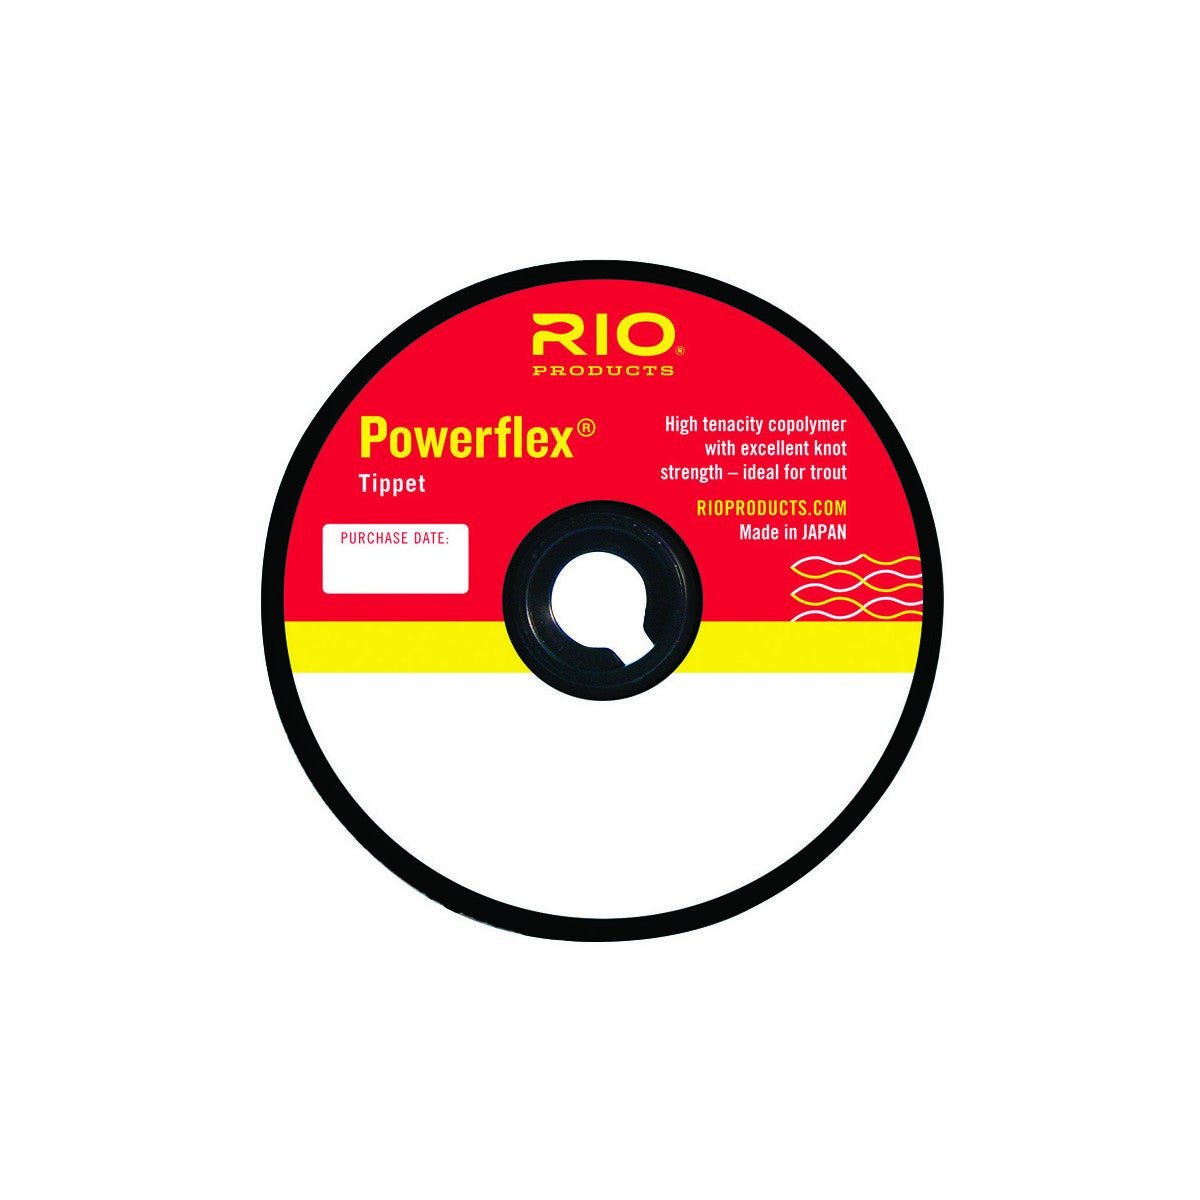 Powerflex Tippet - Rio Products